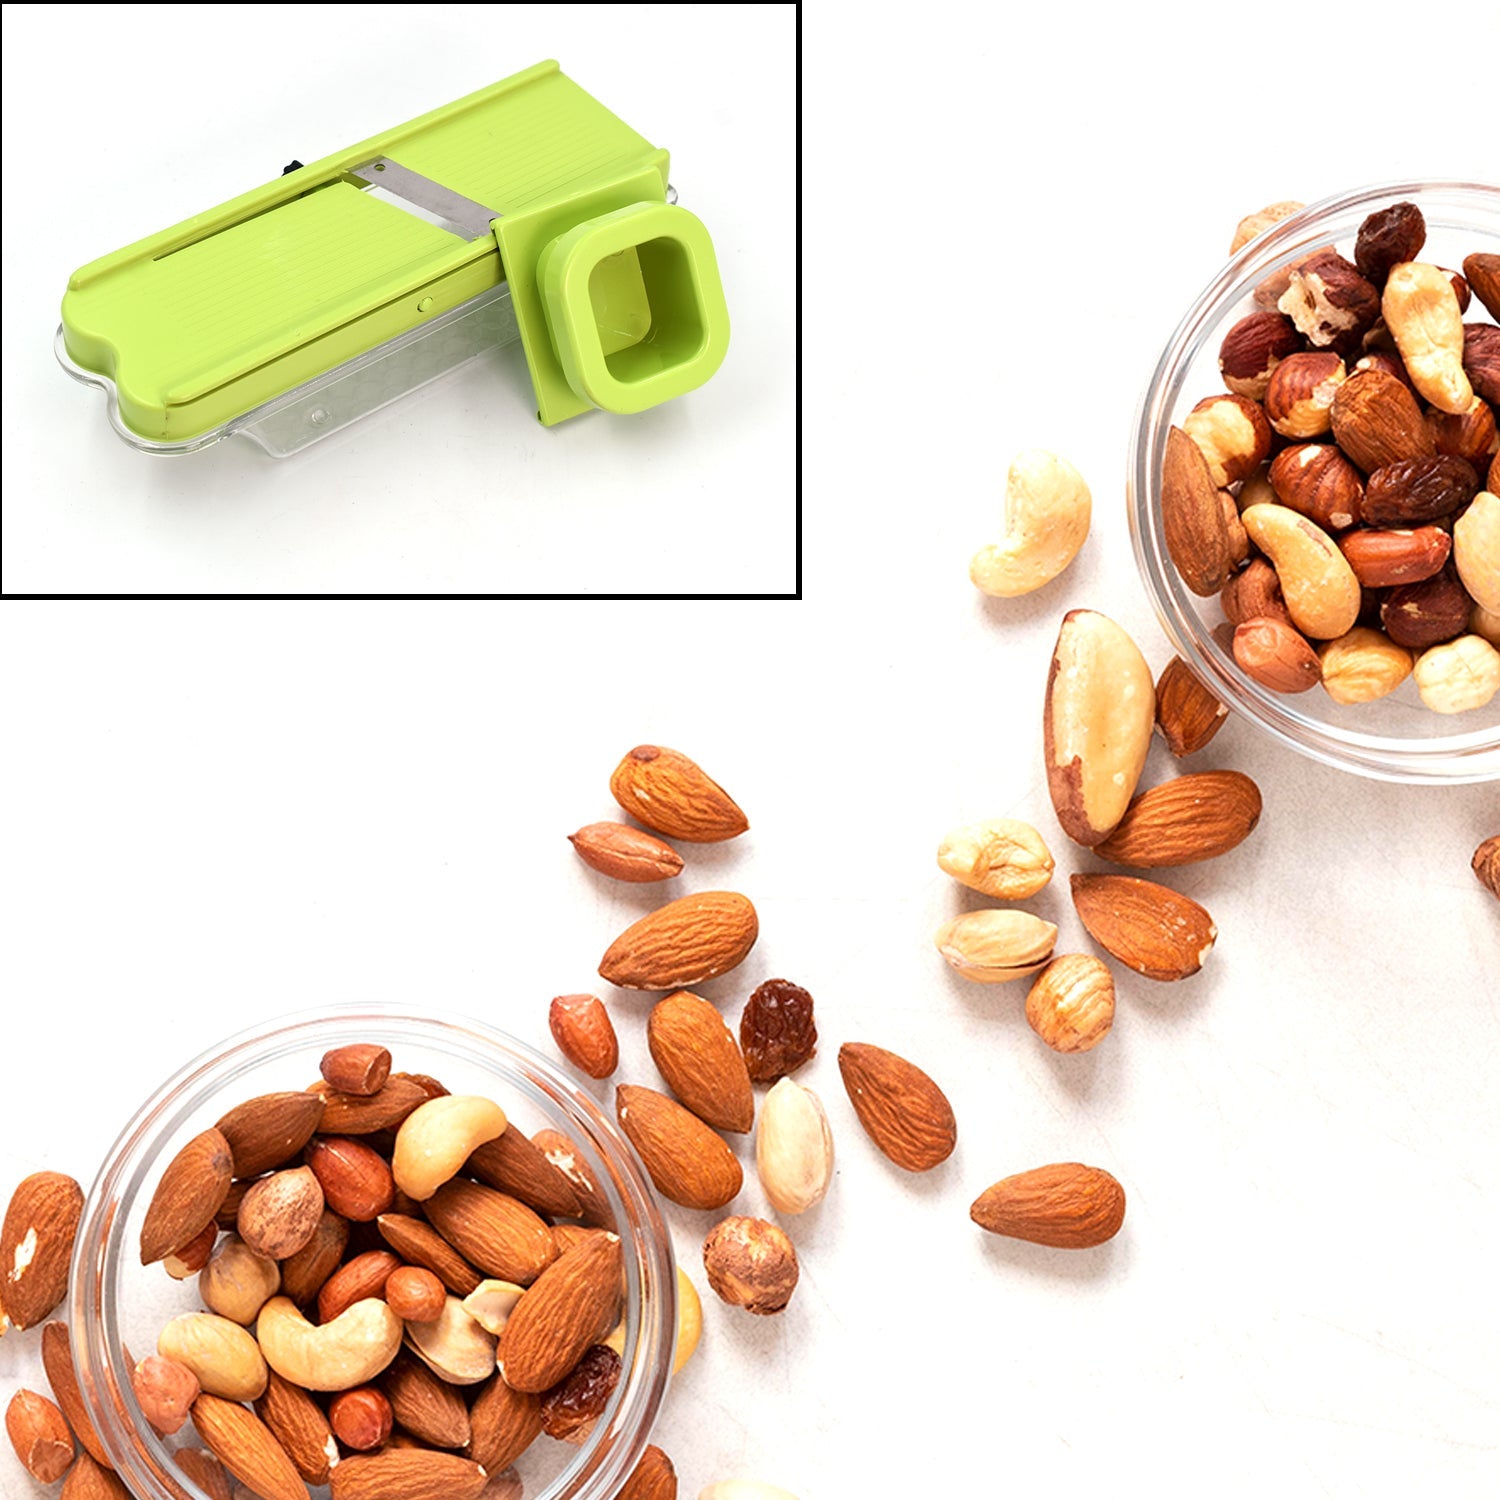 Stainless Steel Vegetable and Dry Fruit Slicer/Cutter